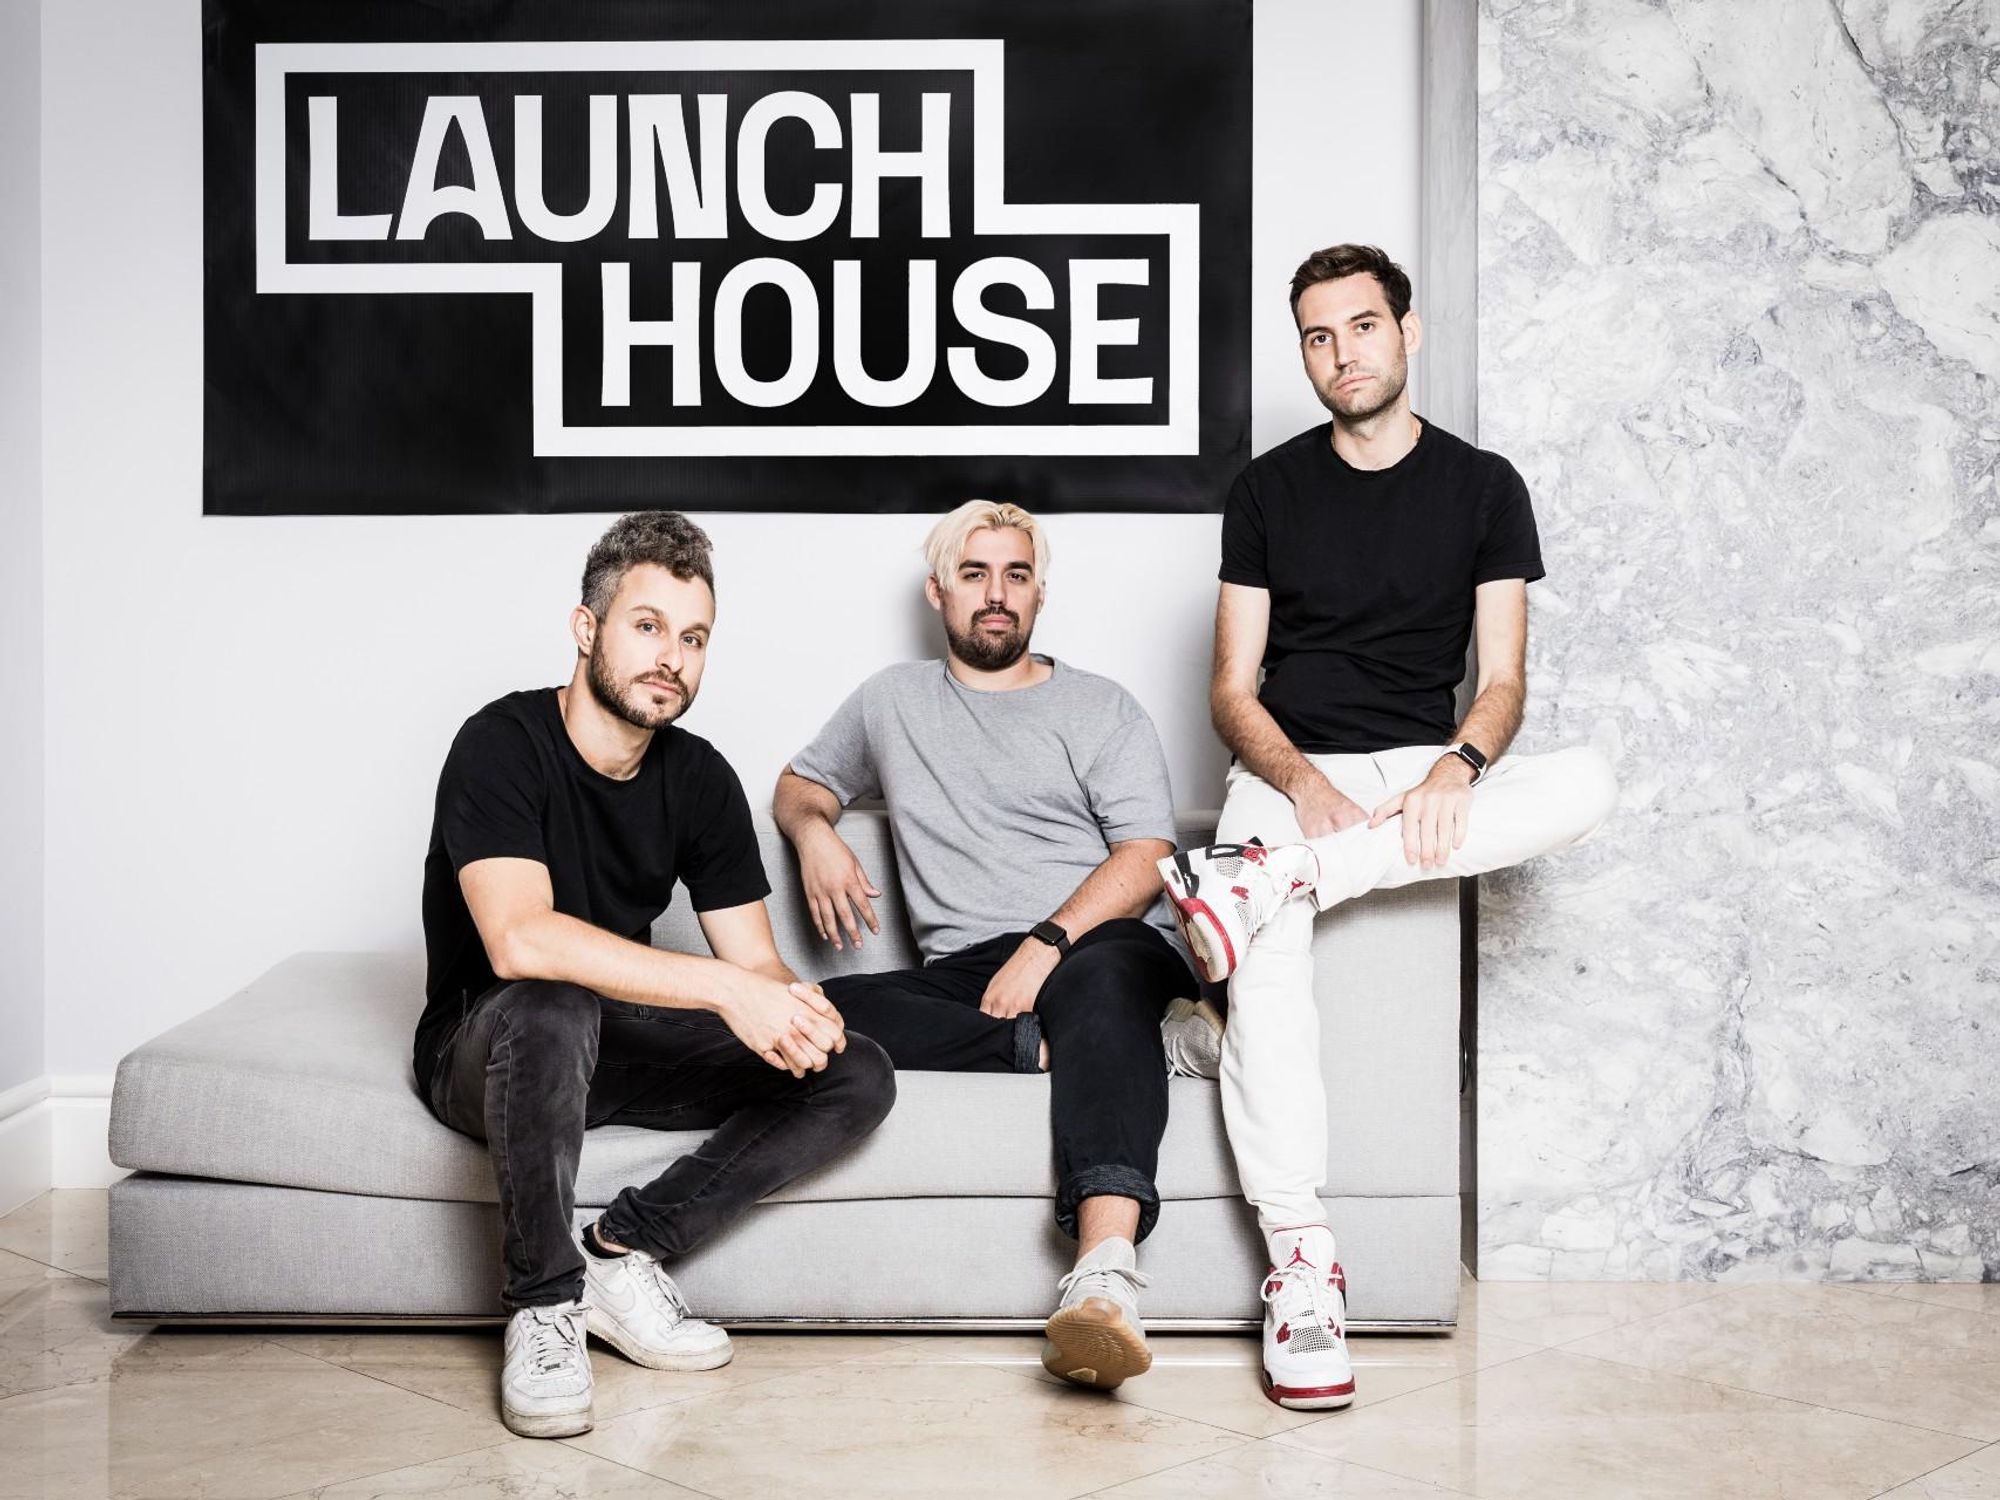 Launch House Accelerator Plans to Expand Its Dorm-Like Approach to New York and Beyond